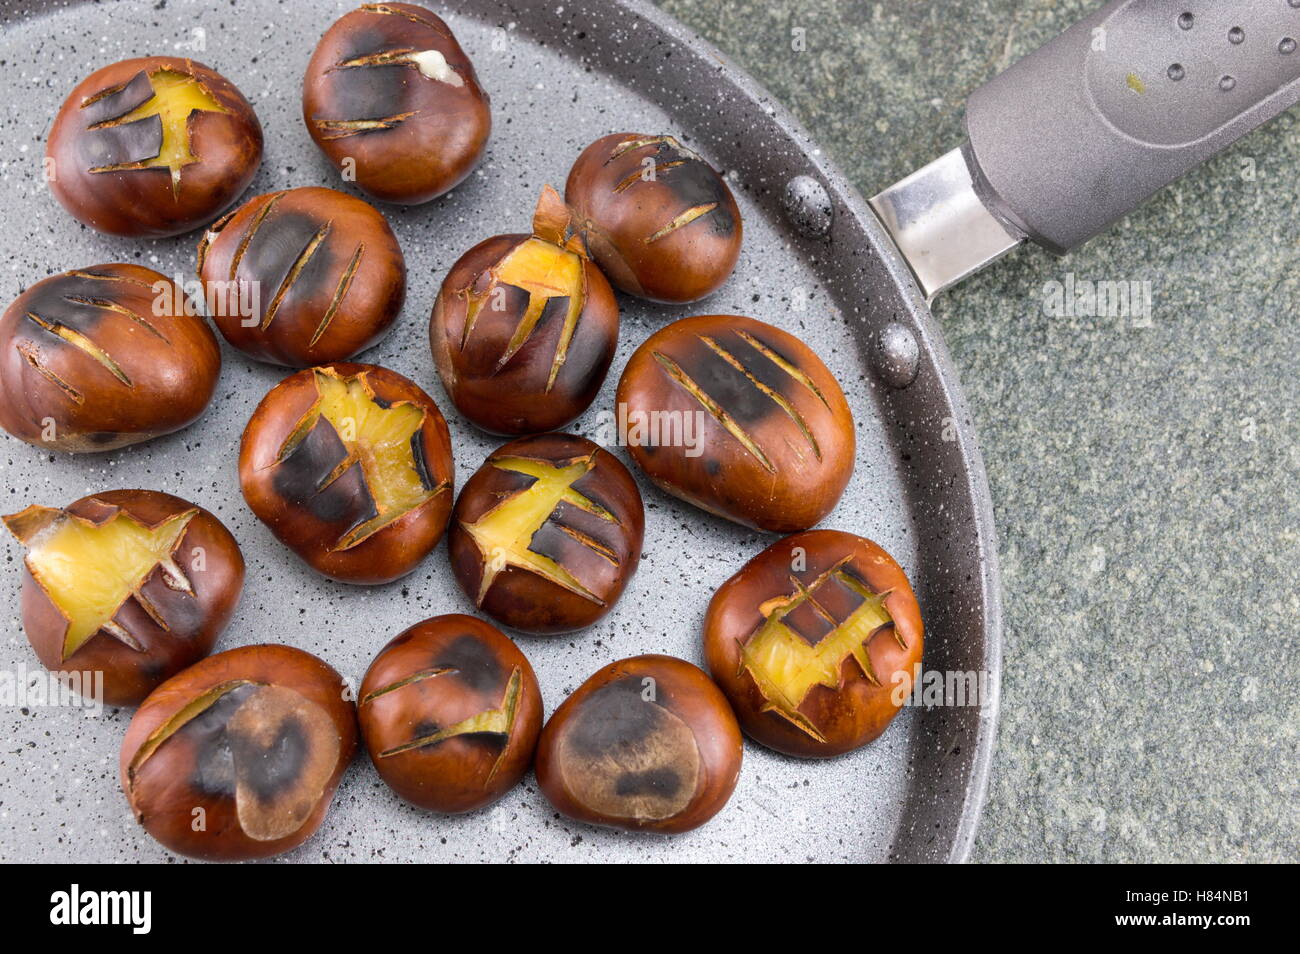 Roasted chestnuts on a stone cooking pan Stock Photo